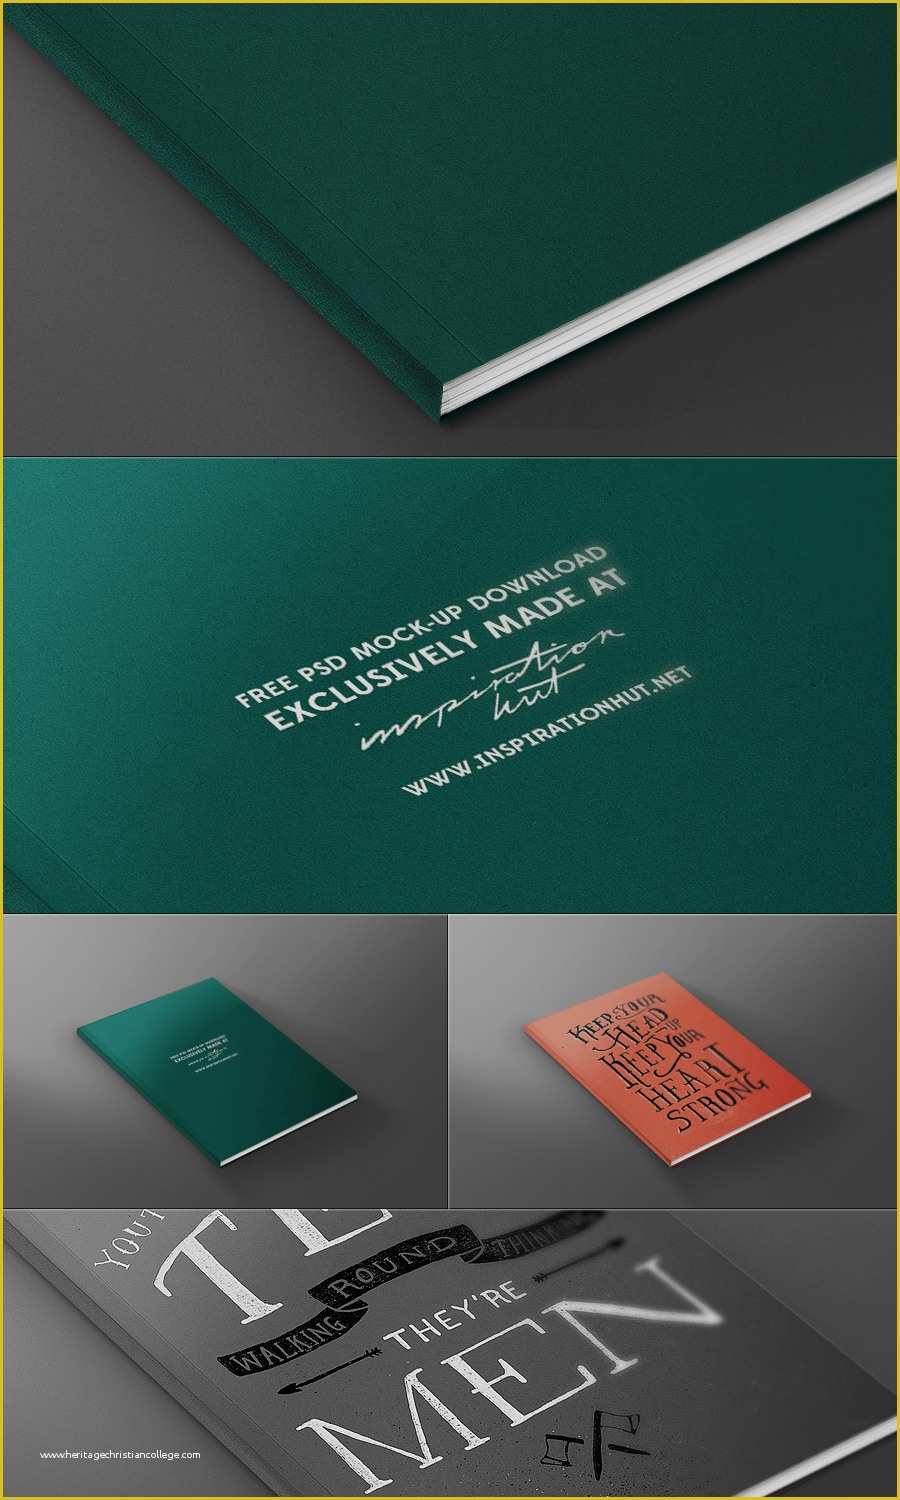 Free Psd Templates Of Free Magazine Book Front Cover Mock Up Template Psd File